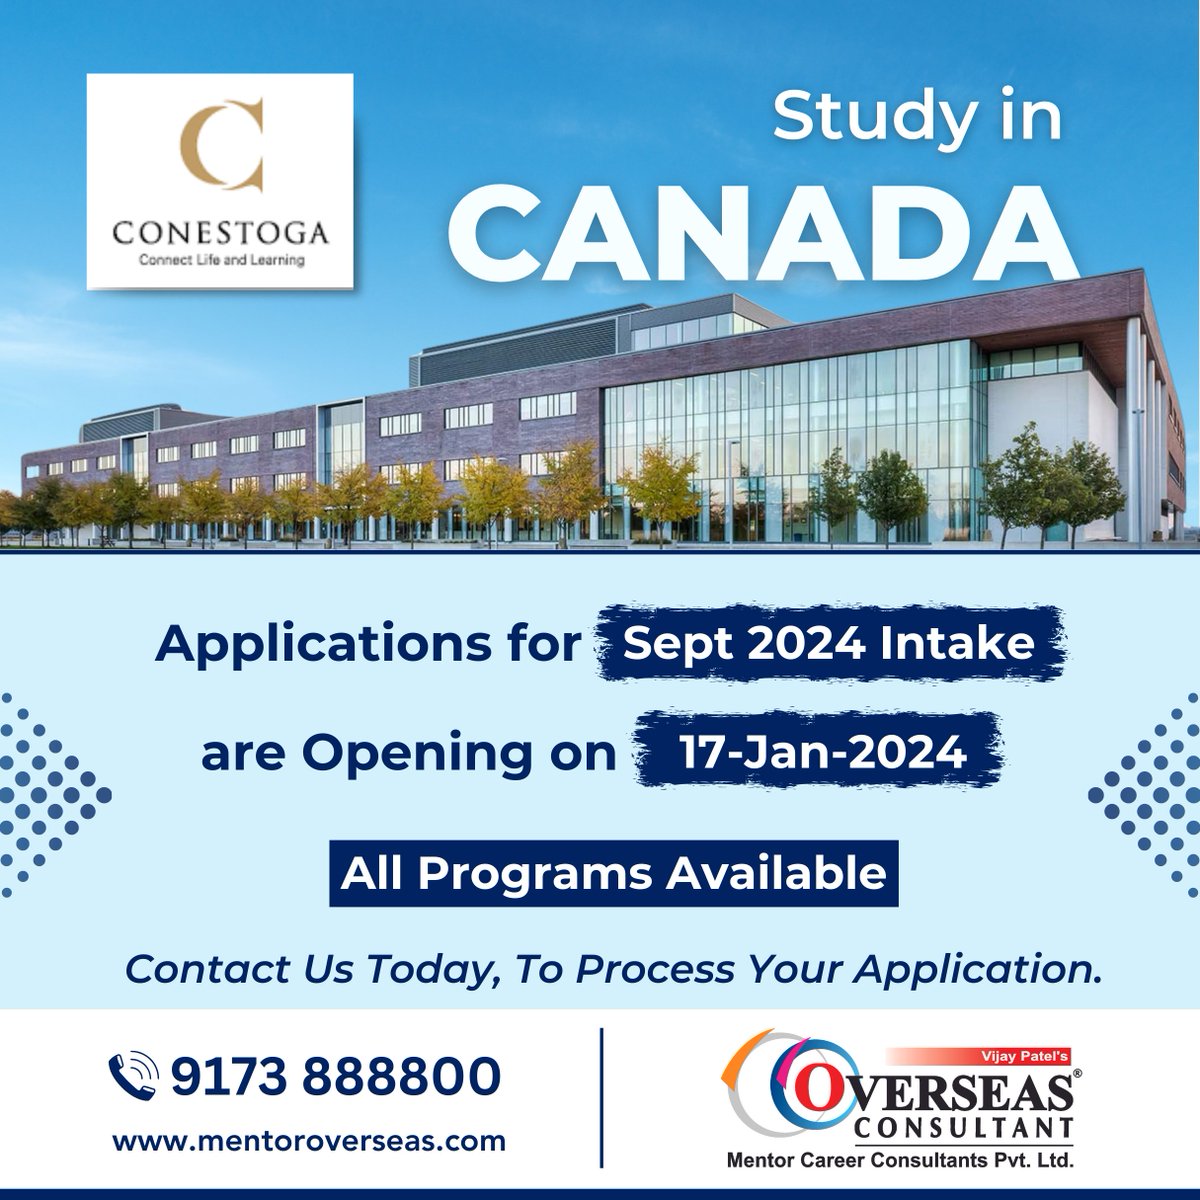 The Most Sought Institute By Gujarati Students, CONESTOGA COLLEGE of Canada is Opening Applications for Sept 2024 Intake on 17-Jan-2024 

Study in CANADA 🇨🇦

bit.ly/2ZLcGz4

#mentoroverseas #studyabroad #overseaseducation #pgwpp #gic #sds #ConestogaCollege #studyincanada